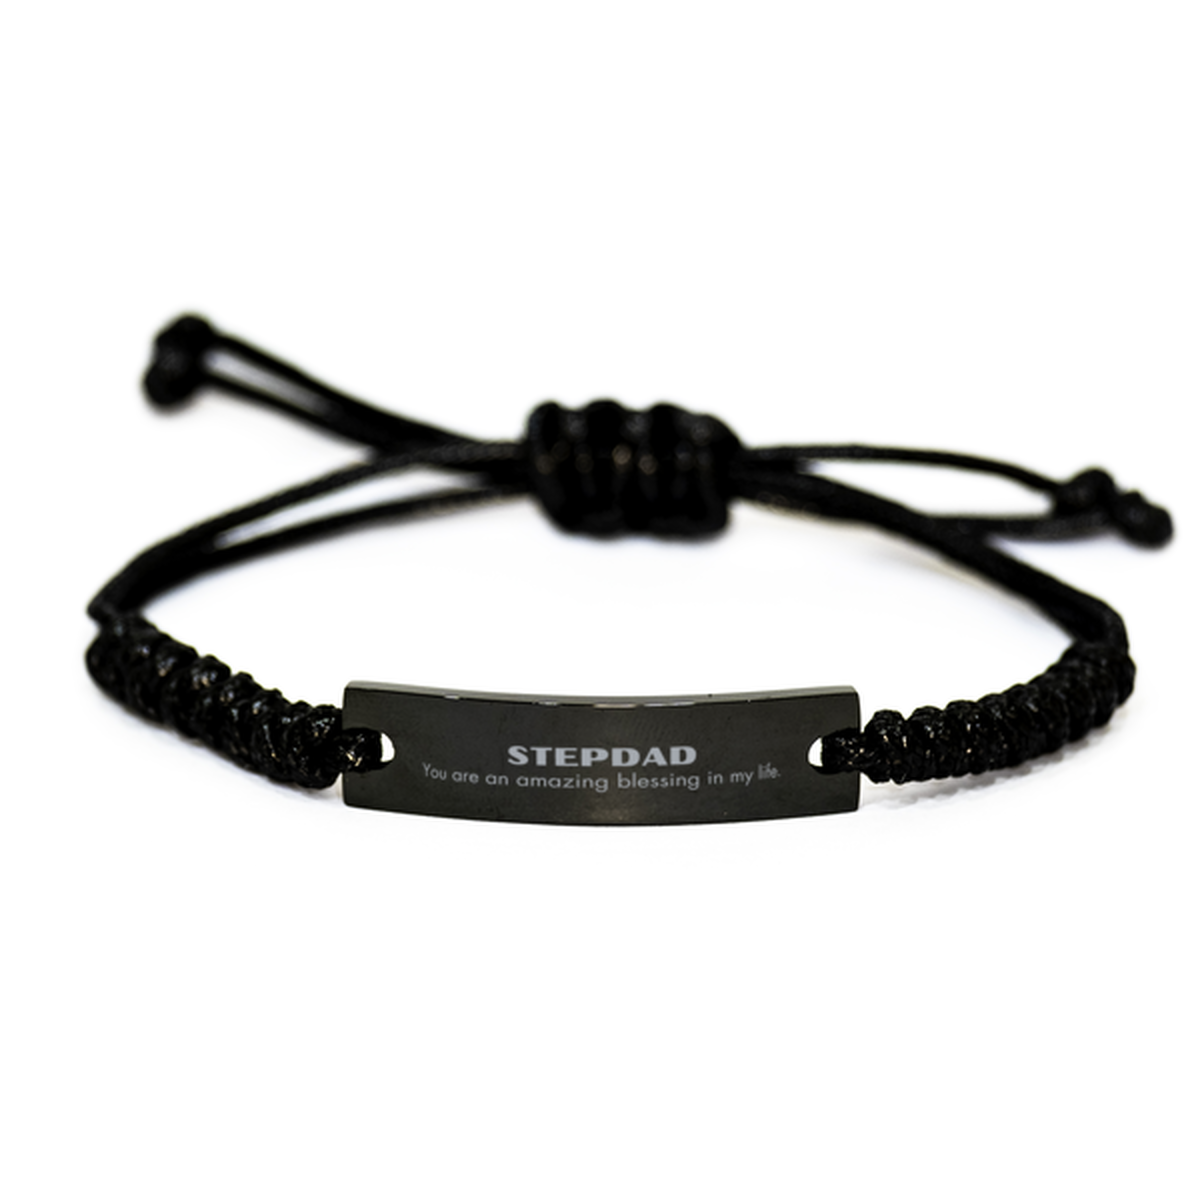 Stepdad Black Rope Bracelet, You are an amazing blessing in my life, Thank You Gifts For Stepdad, Inspirational Birthday Christmas Unique Gifts For Stepdad